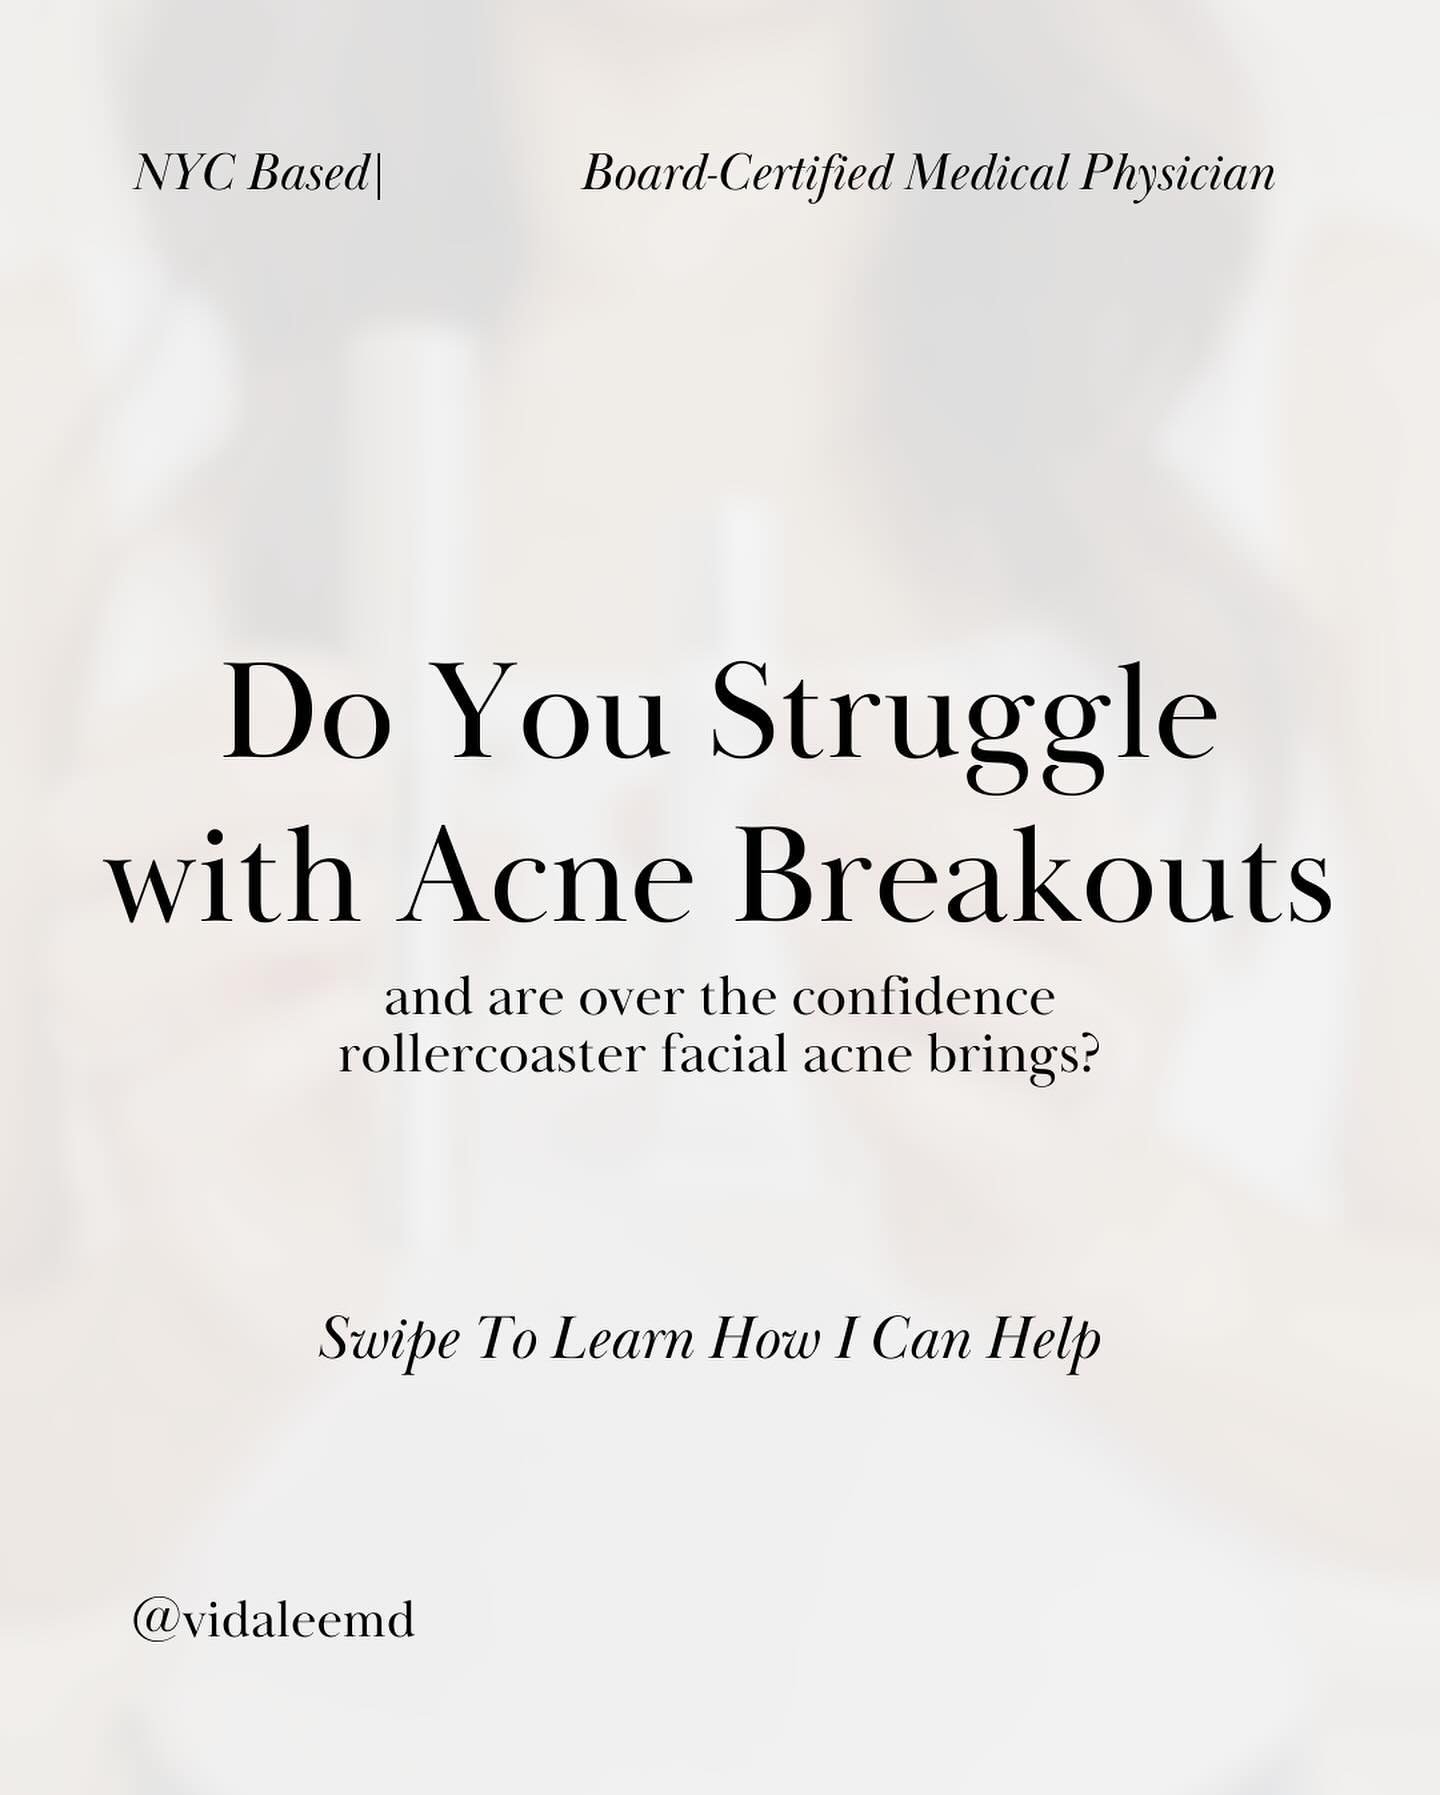 Let&rsquo;s talk about acne, and what causes it.⁠
⁠
Acne is essentially formed when the pores get clogged with oil and dead skin. Bacteria and inflammation set in, and your skin &ldquo;breaks out&rdquo; into pimples, and sometimes even cysts. 

At th